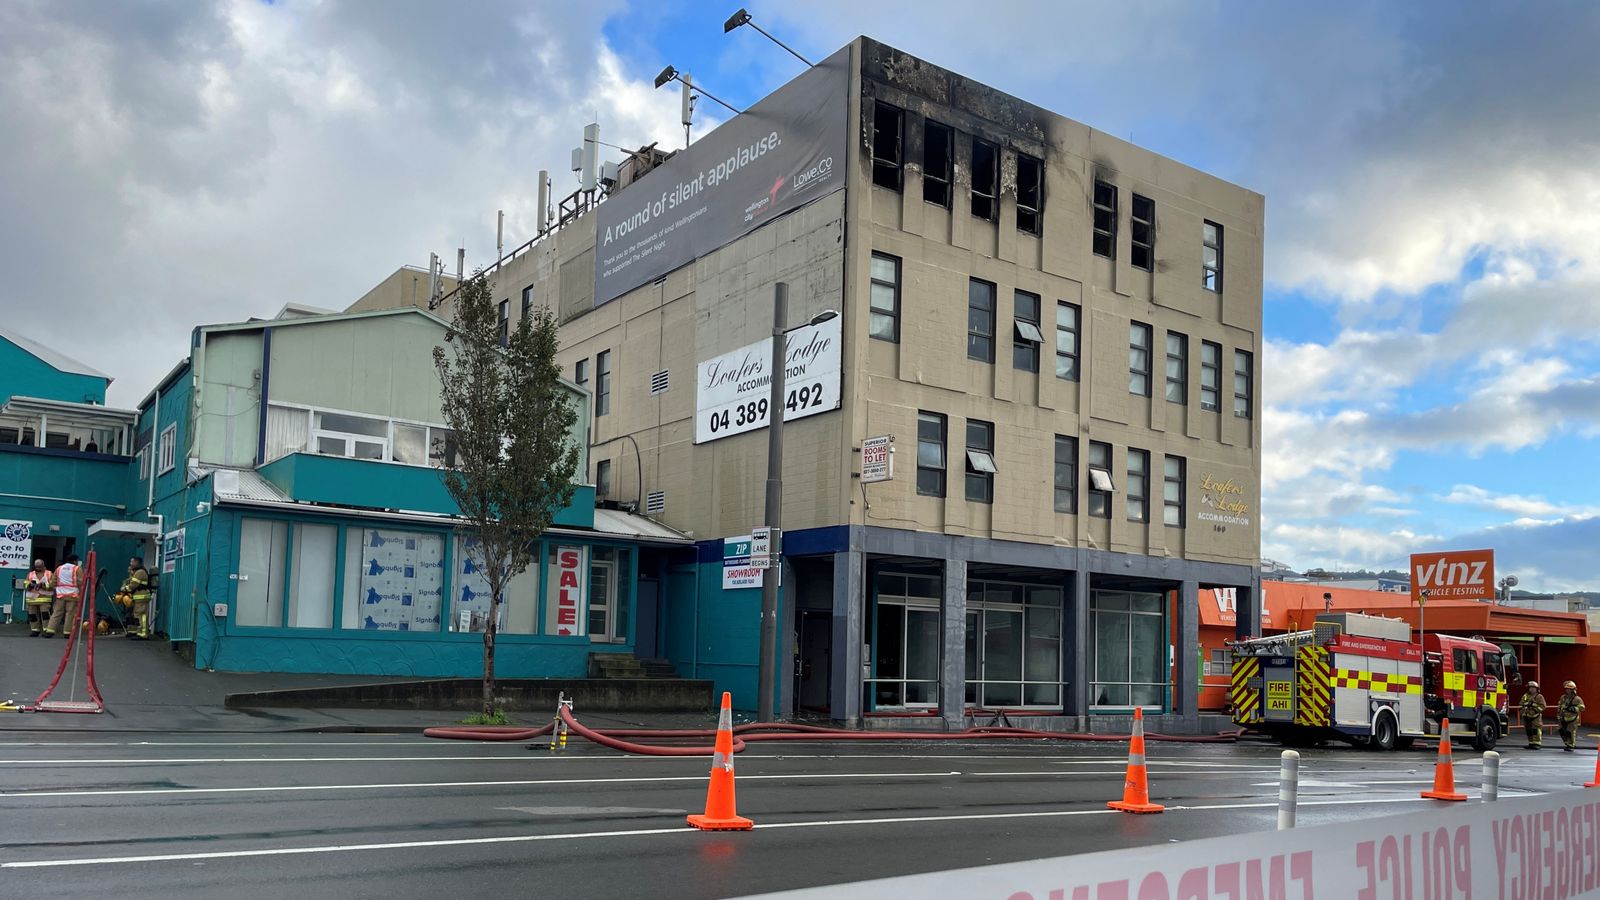 Deadly fire at New Zealand hostel is being treated as suspicious